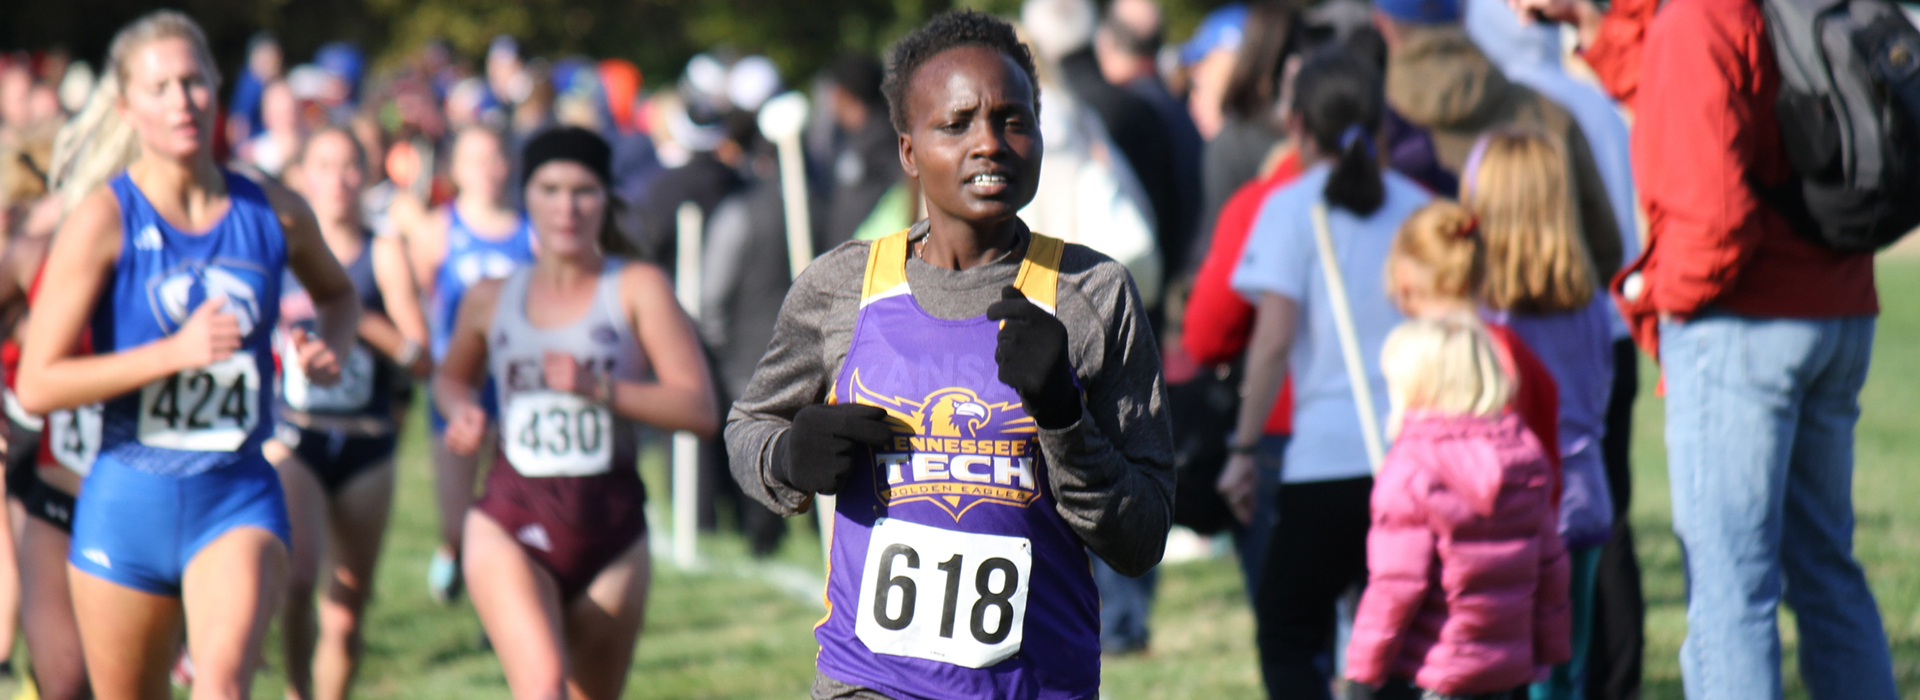 Jesang makes Tech history as best-ever freshman finisher at OVC Championships